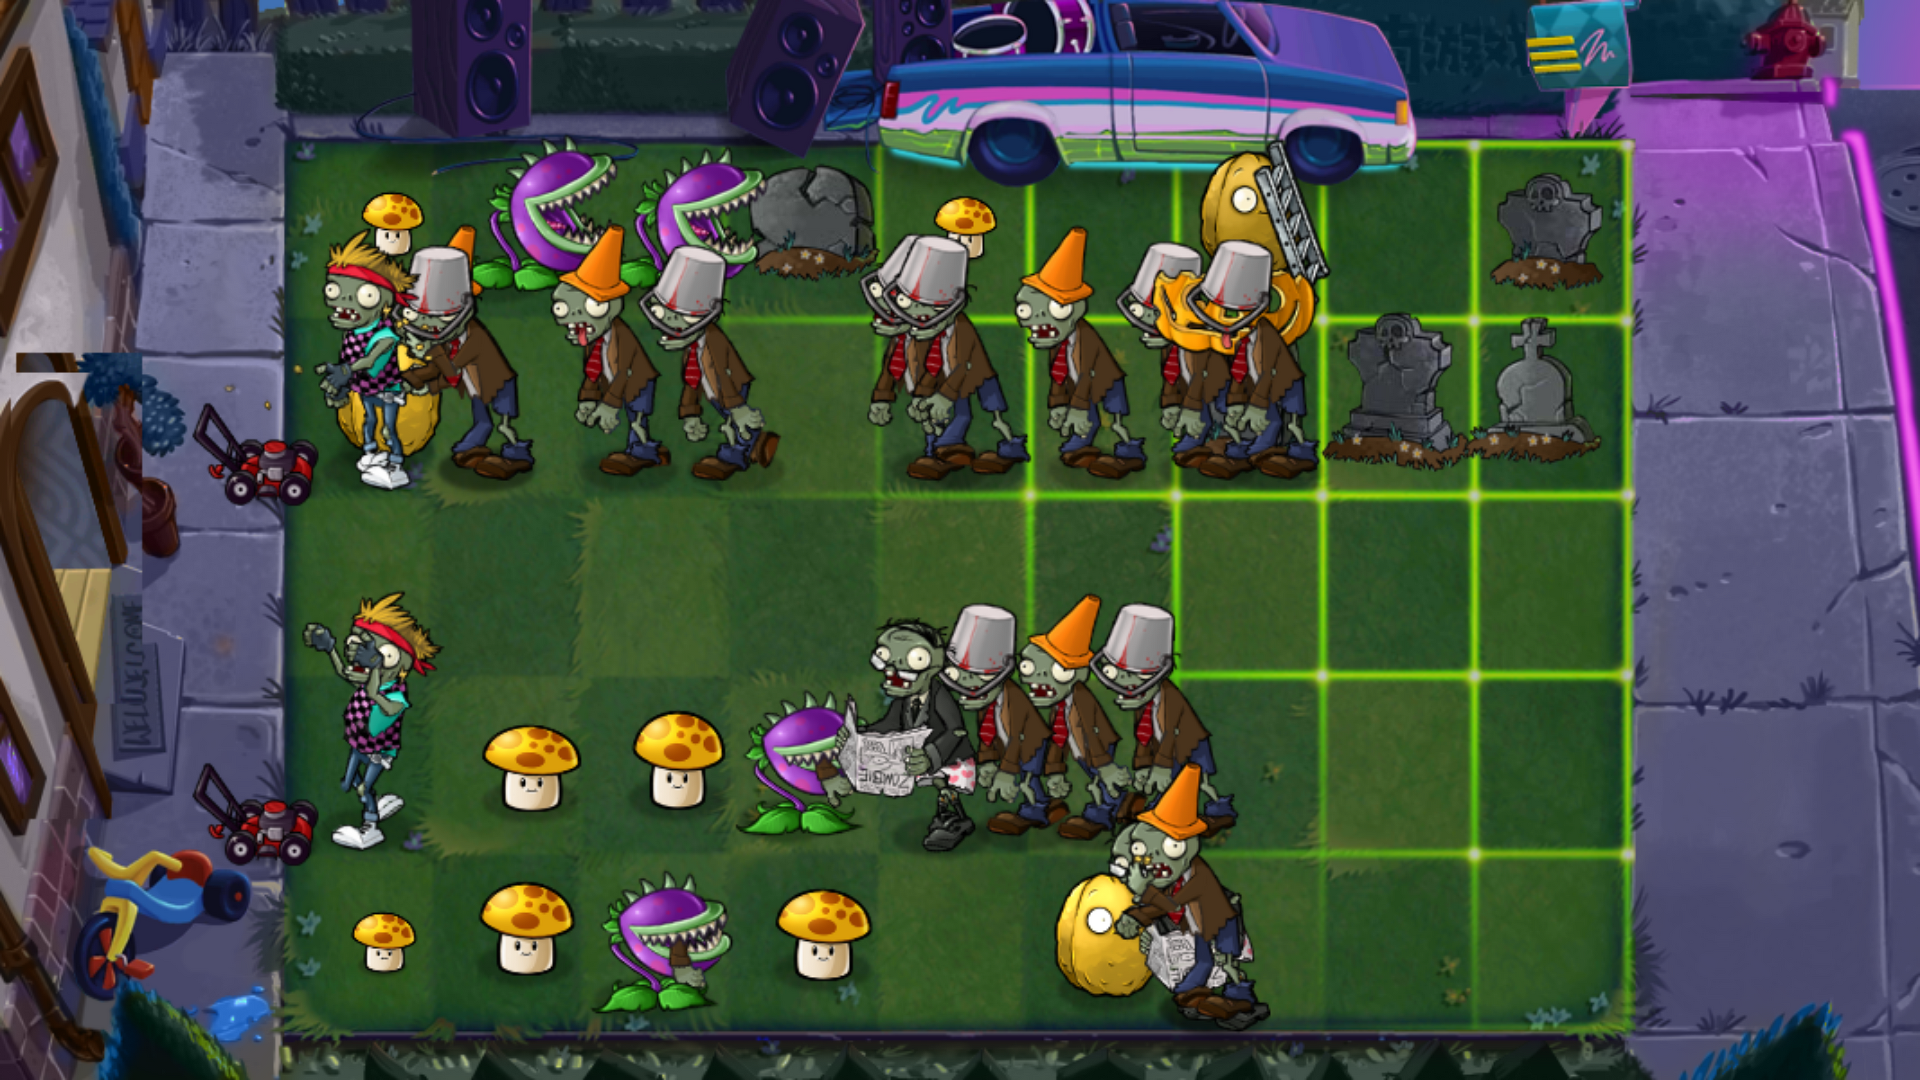 PC] Plants vs Zombies 3 Chinese Mod for PC - Beta Ver0.1 (Download link) 